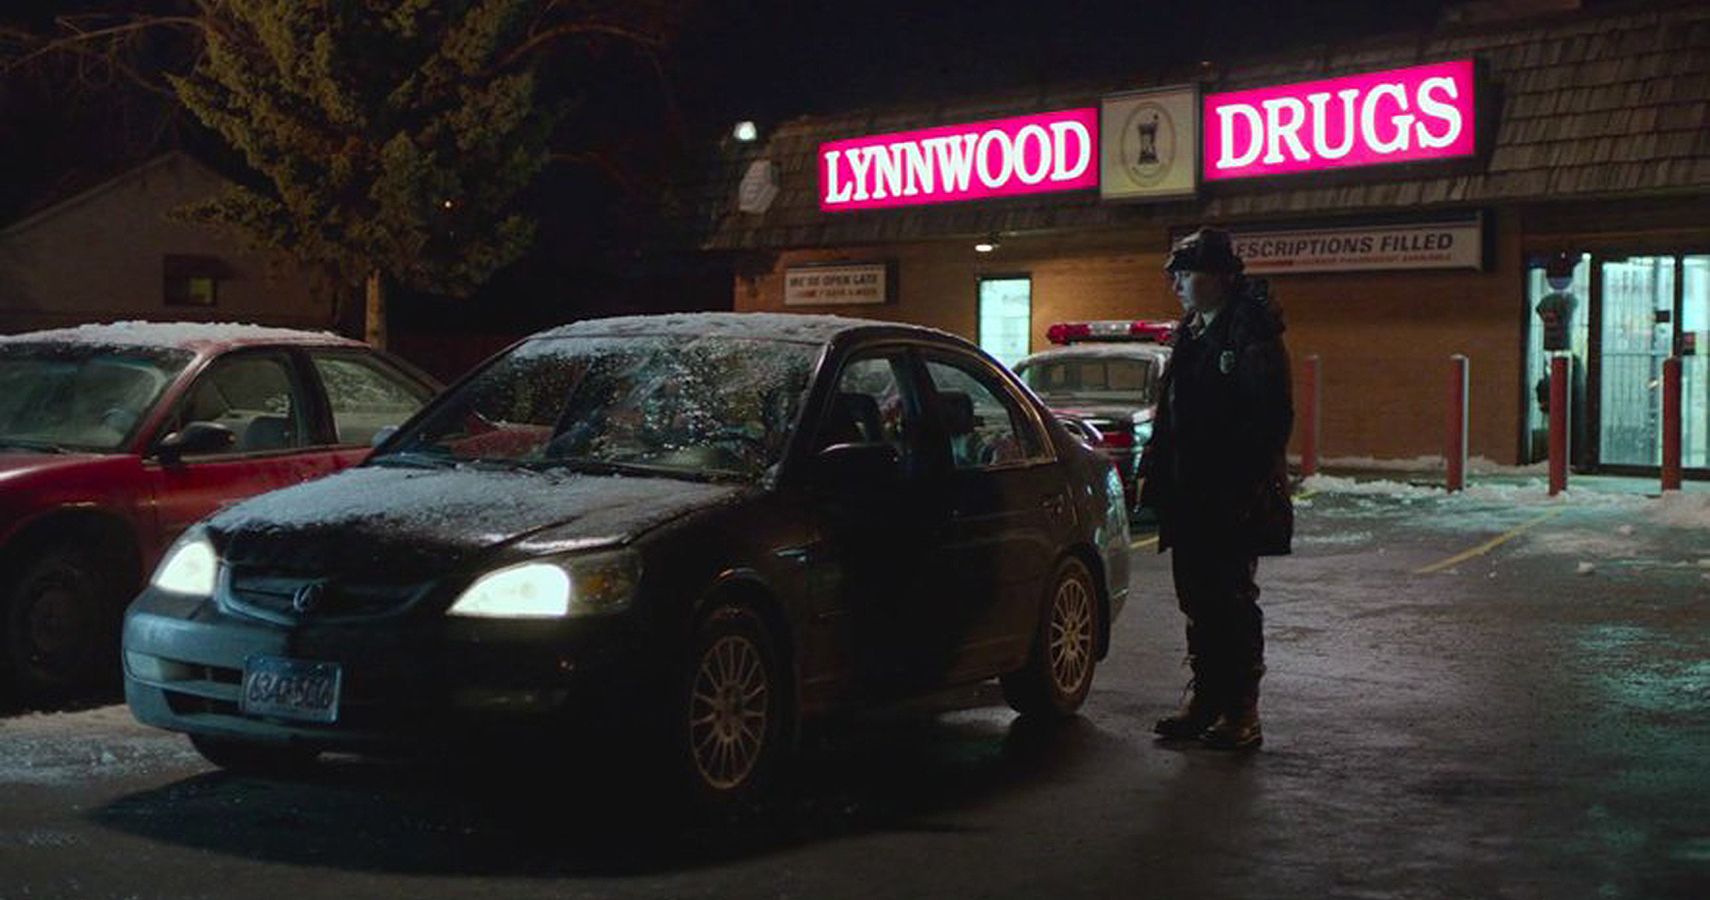 The 2001 Acura El Was A Cool Enough Car And Seemed To Grow More Nefarious With Every Episode Of The TV Series Fargo